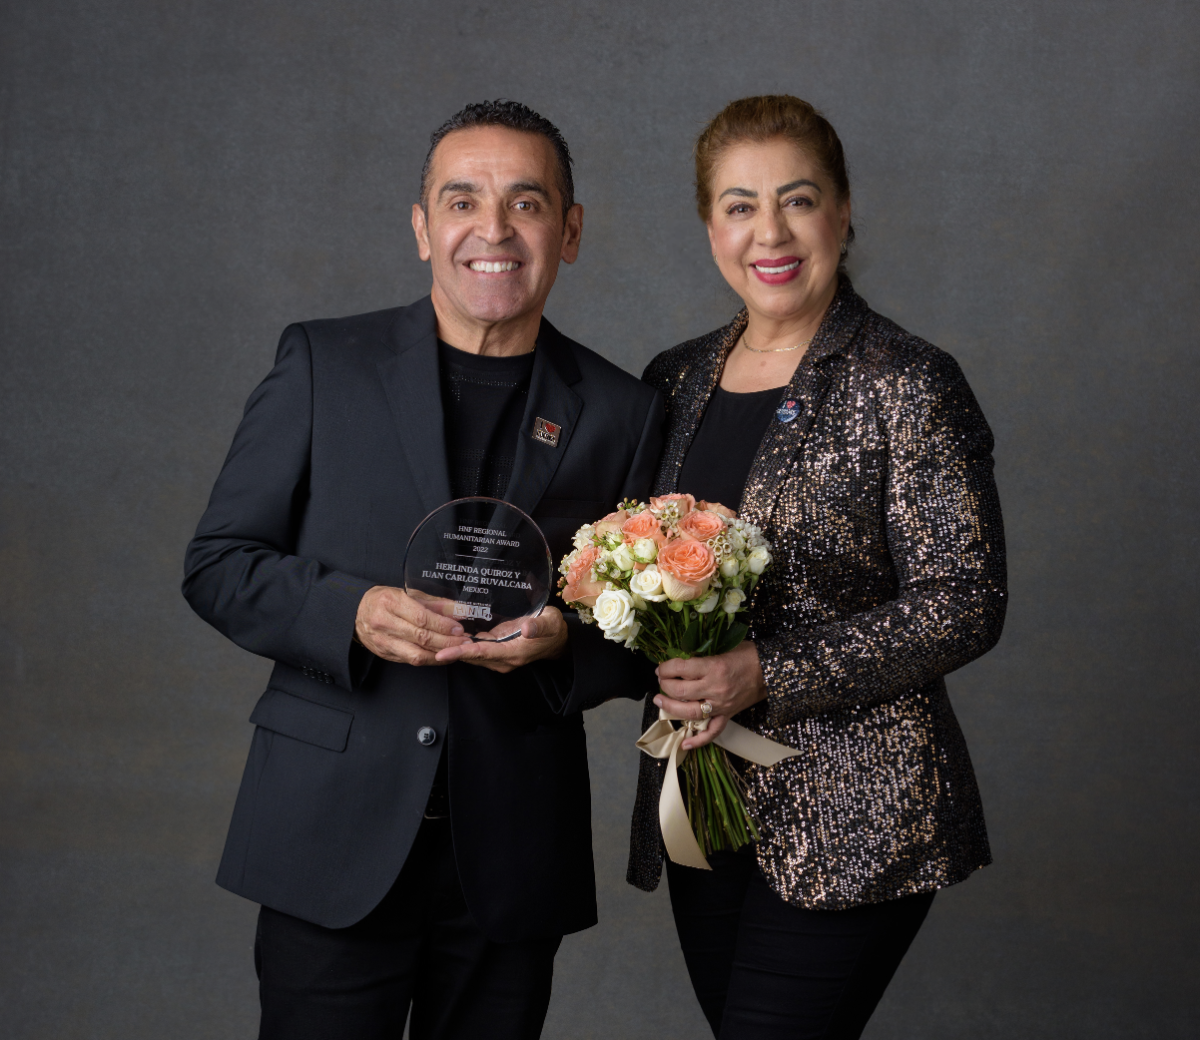 Two people stood next to each other smiling, one person holding an award and the other holding flowers